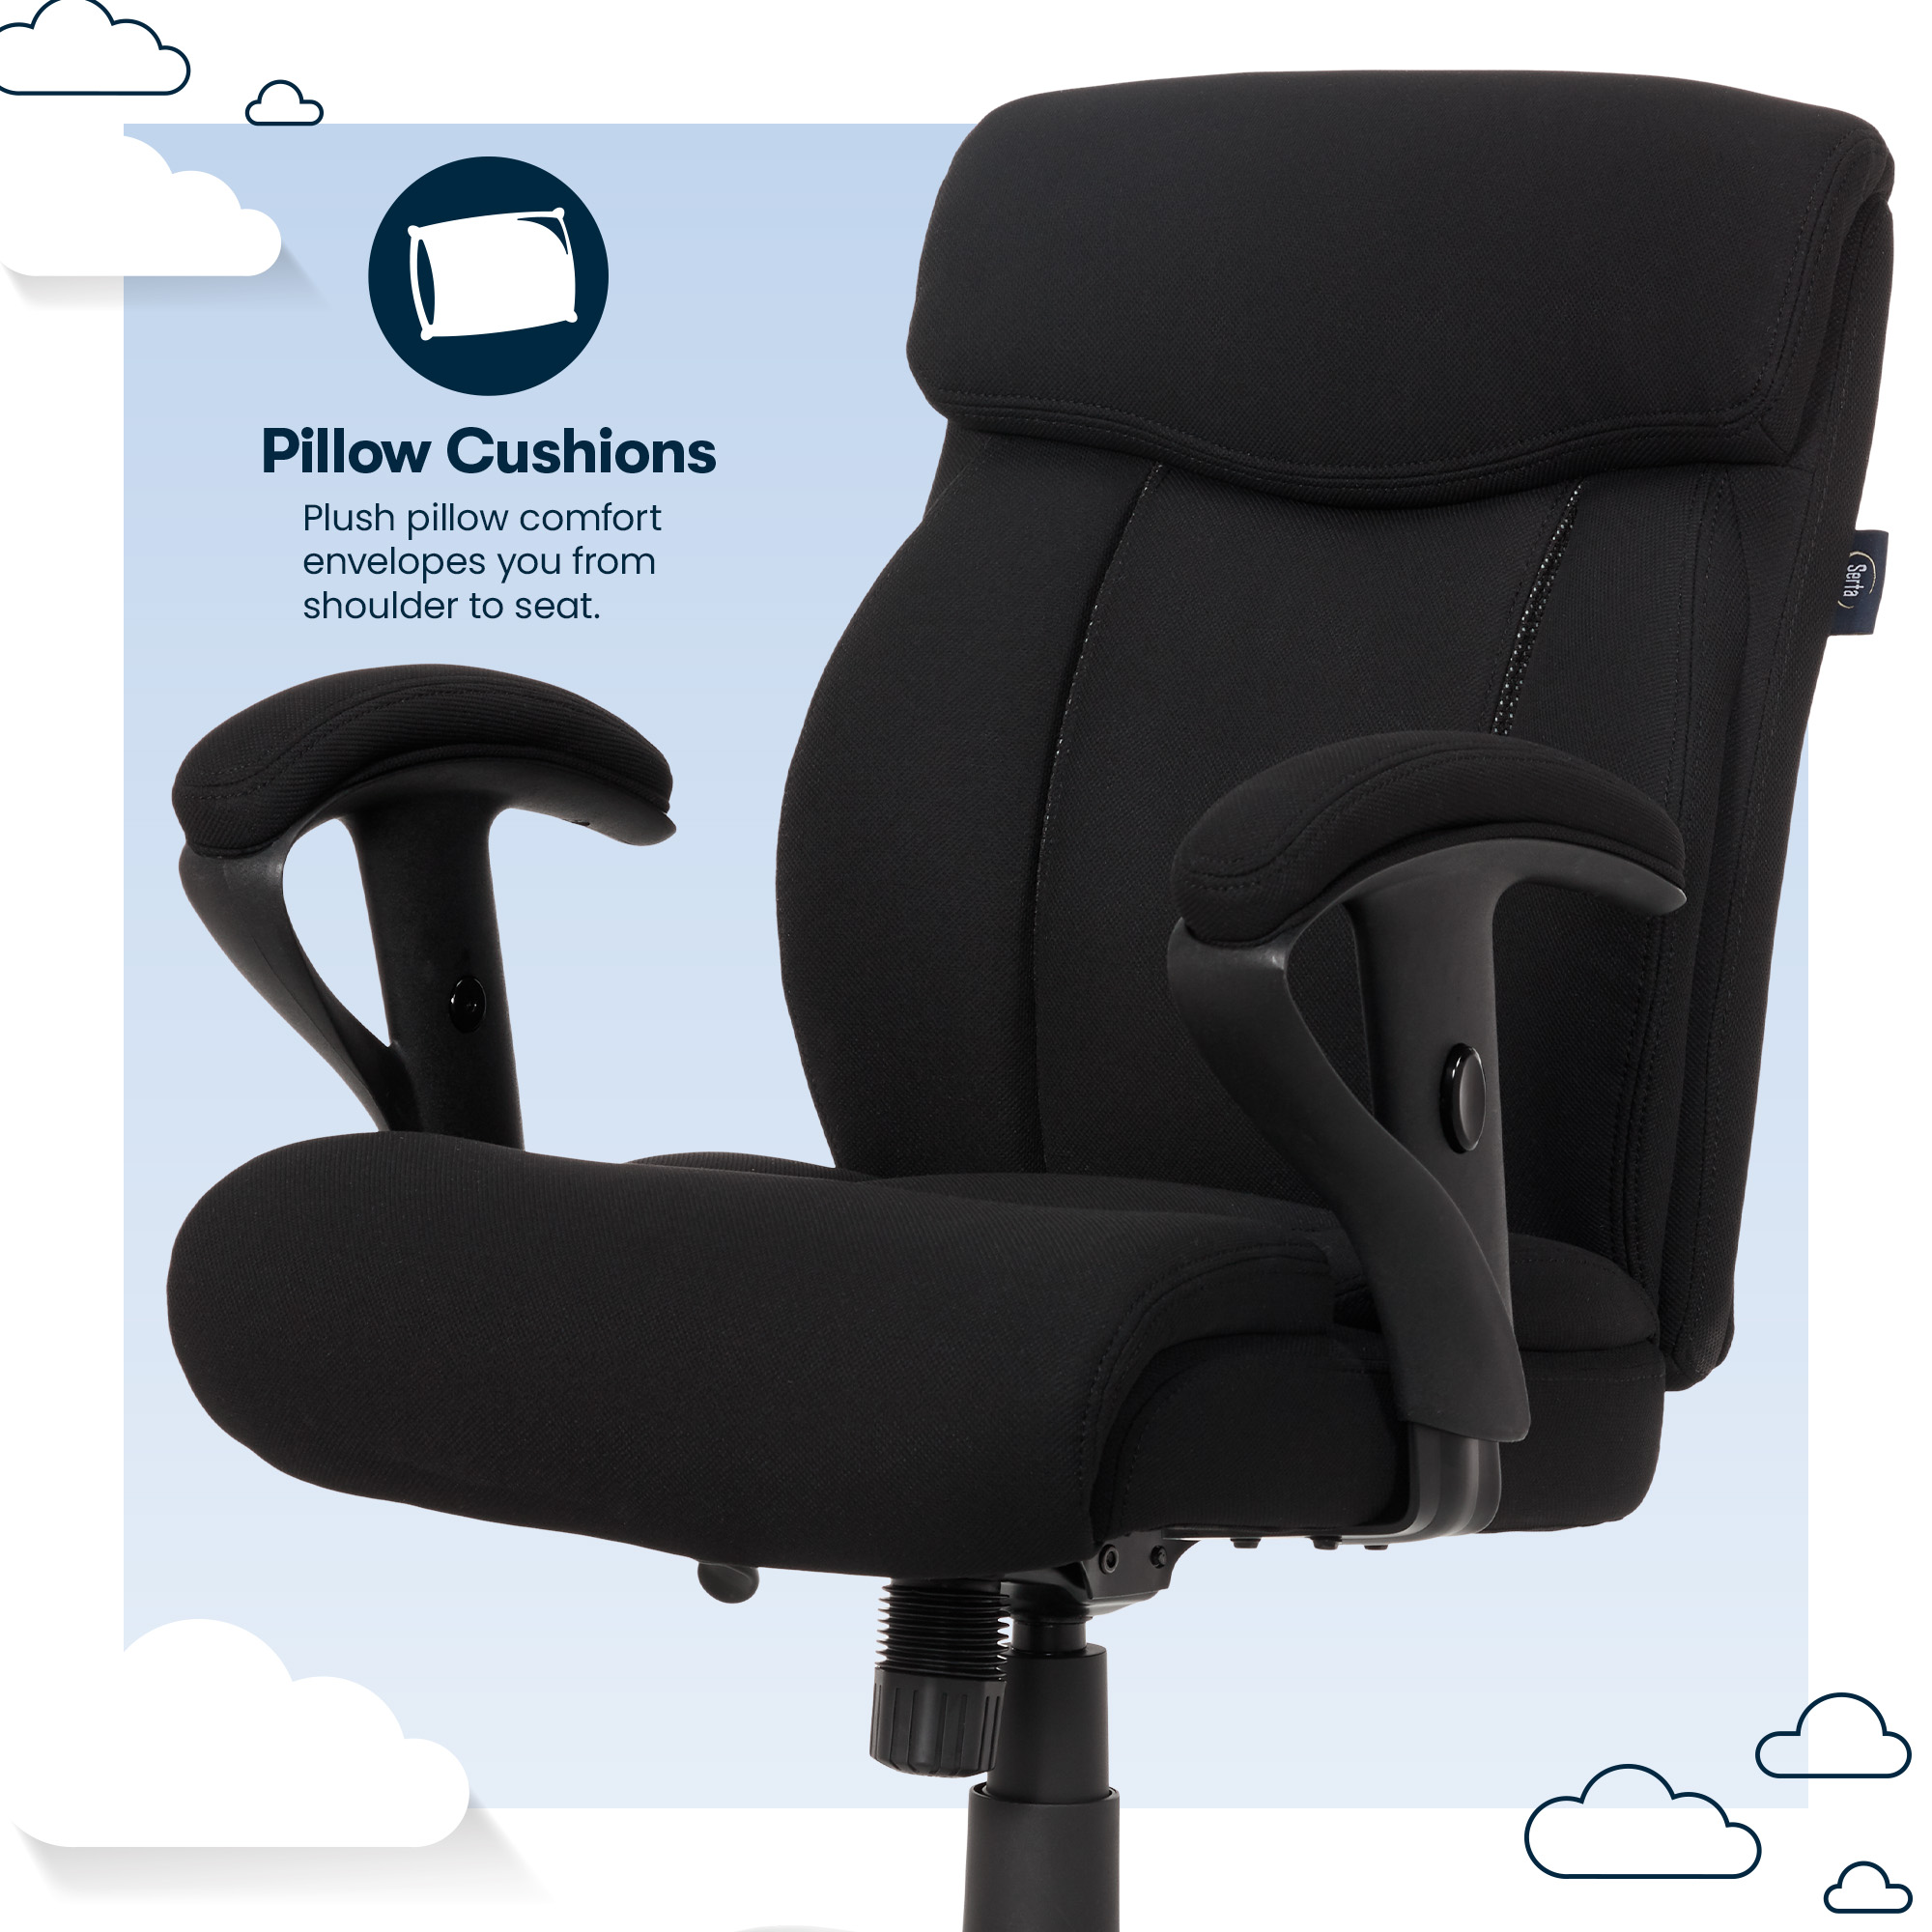 Serta Big & Tall Fabric Manager Office Chair, Supports up to 300 lbs, Black - image 4 of 15